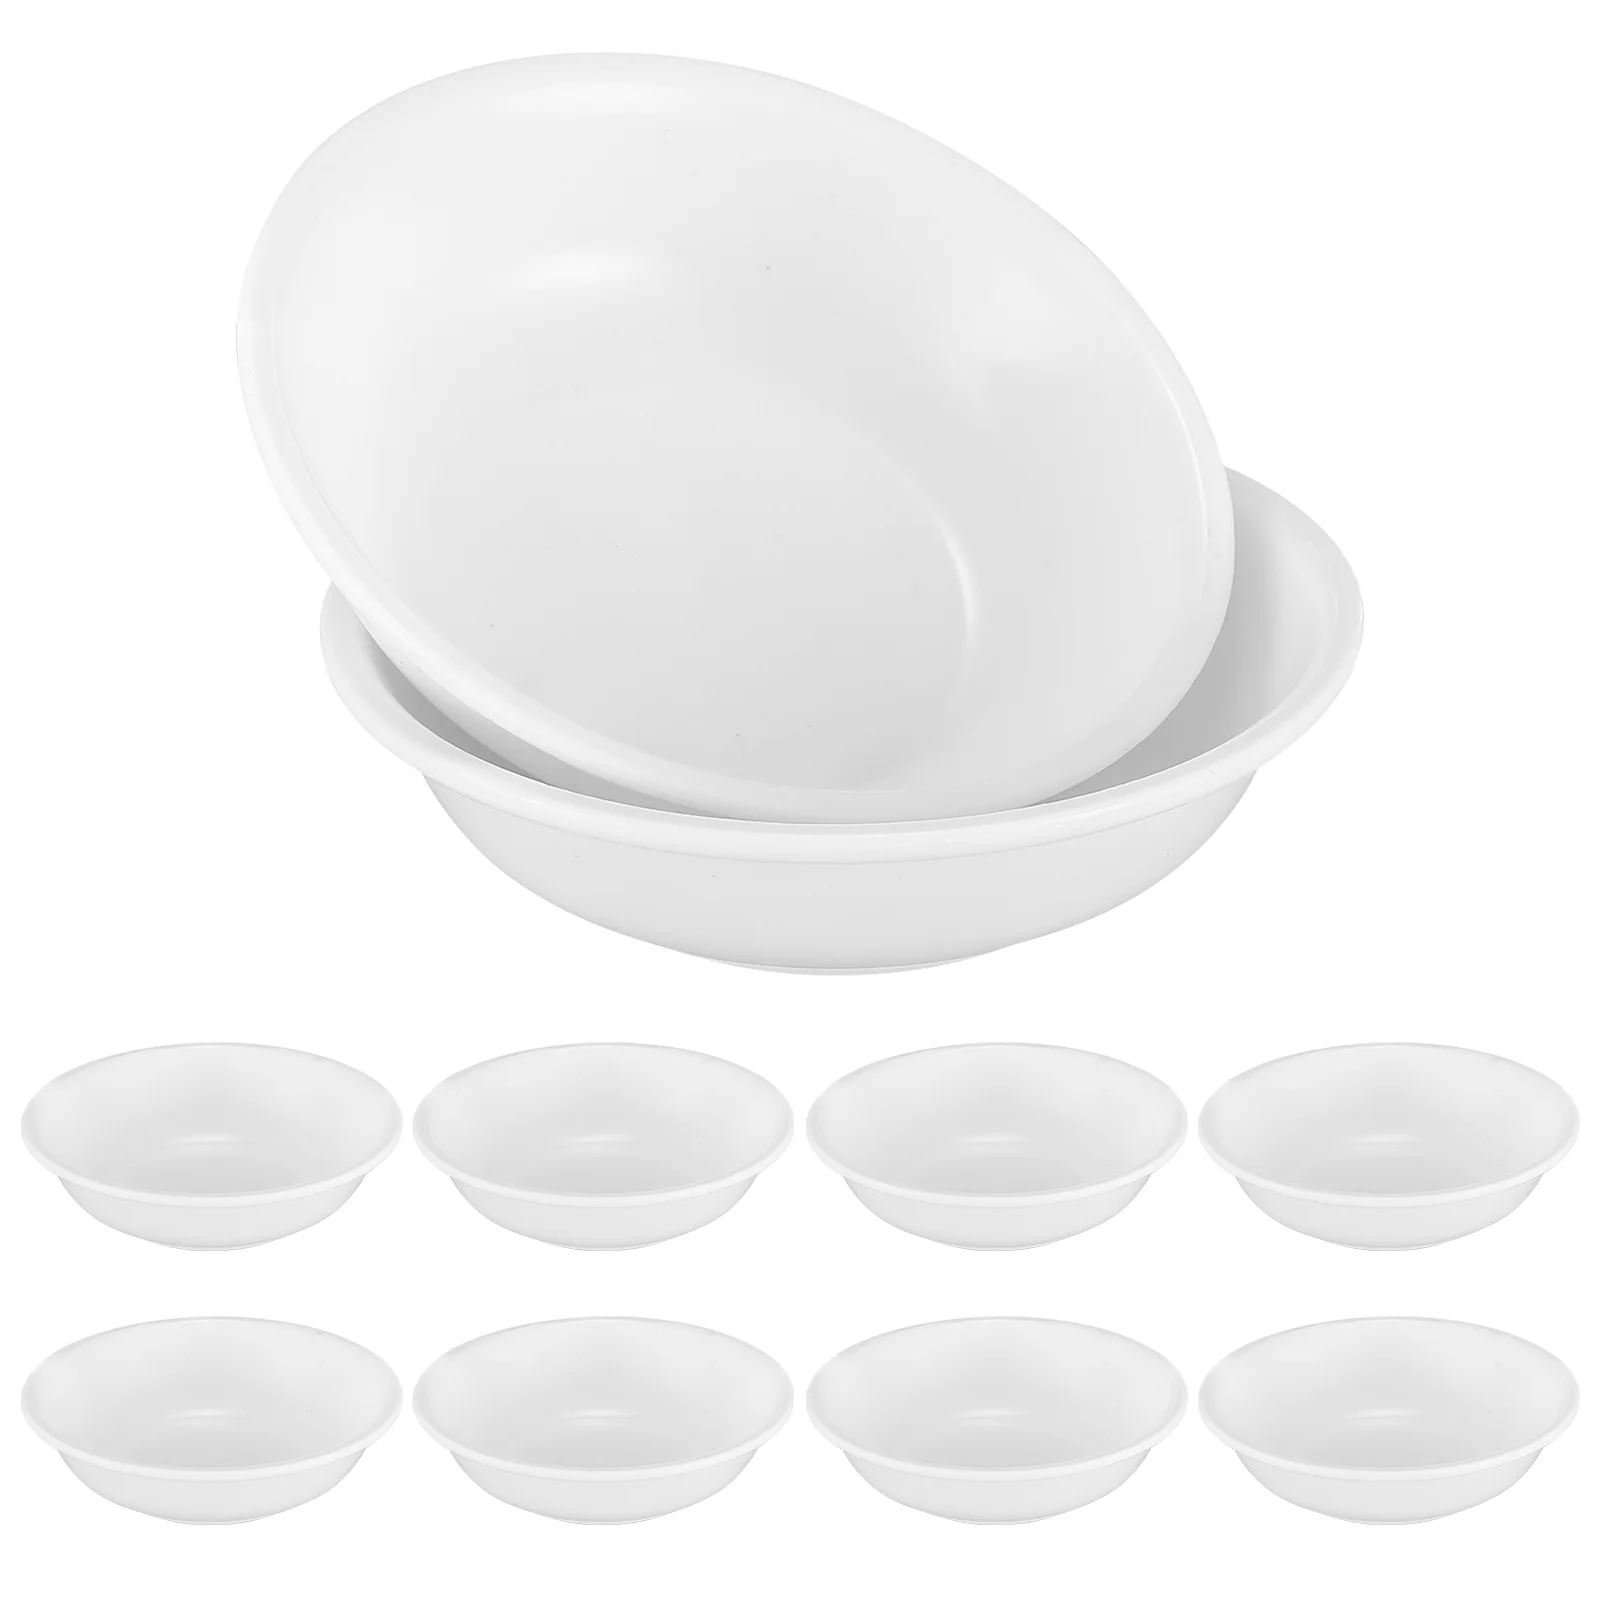 

Appetizer Plates Flavor Dish Seasoning Dishes Condiment Serving Tray Dipping Set Plastic Small Saucer Bowls